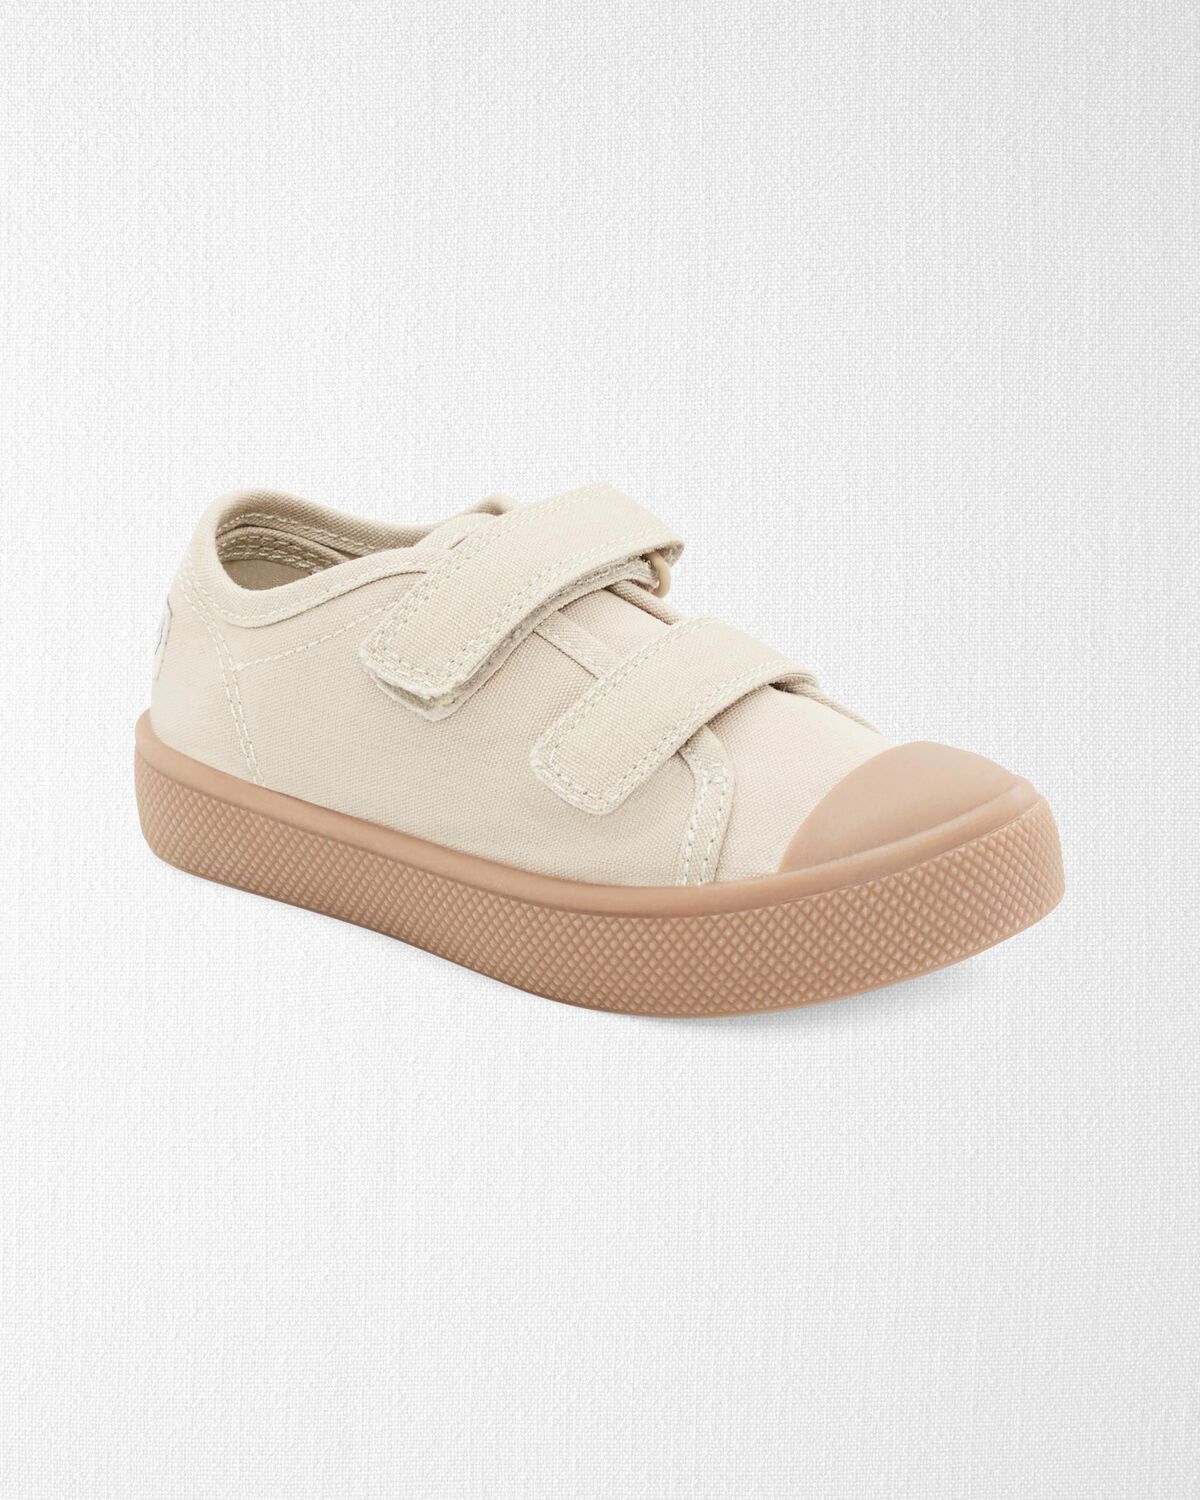 Ivory Toddler Recycled Canvas Slip-On Sneaker | carters.com